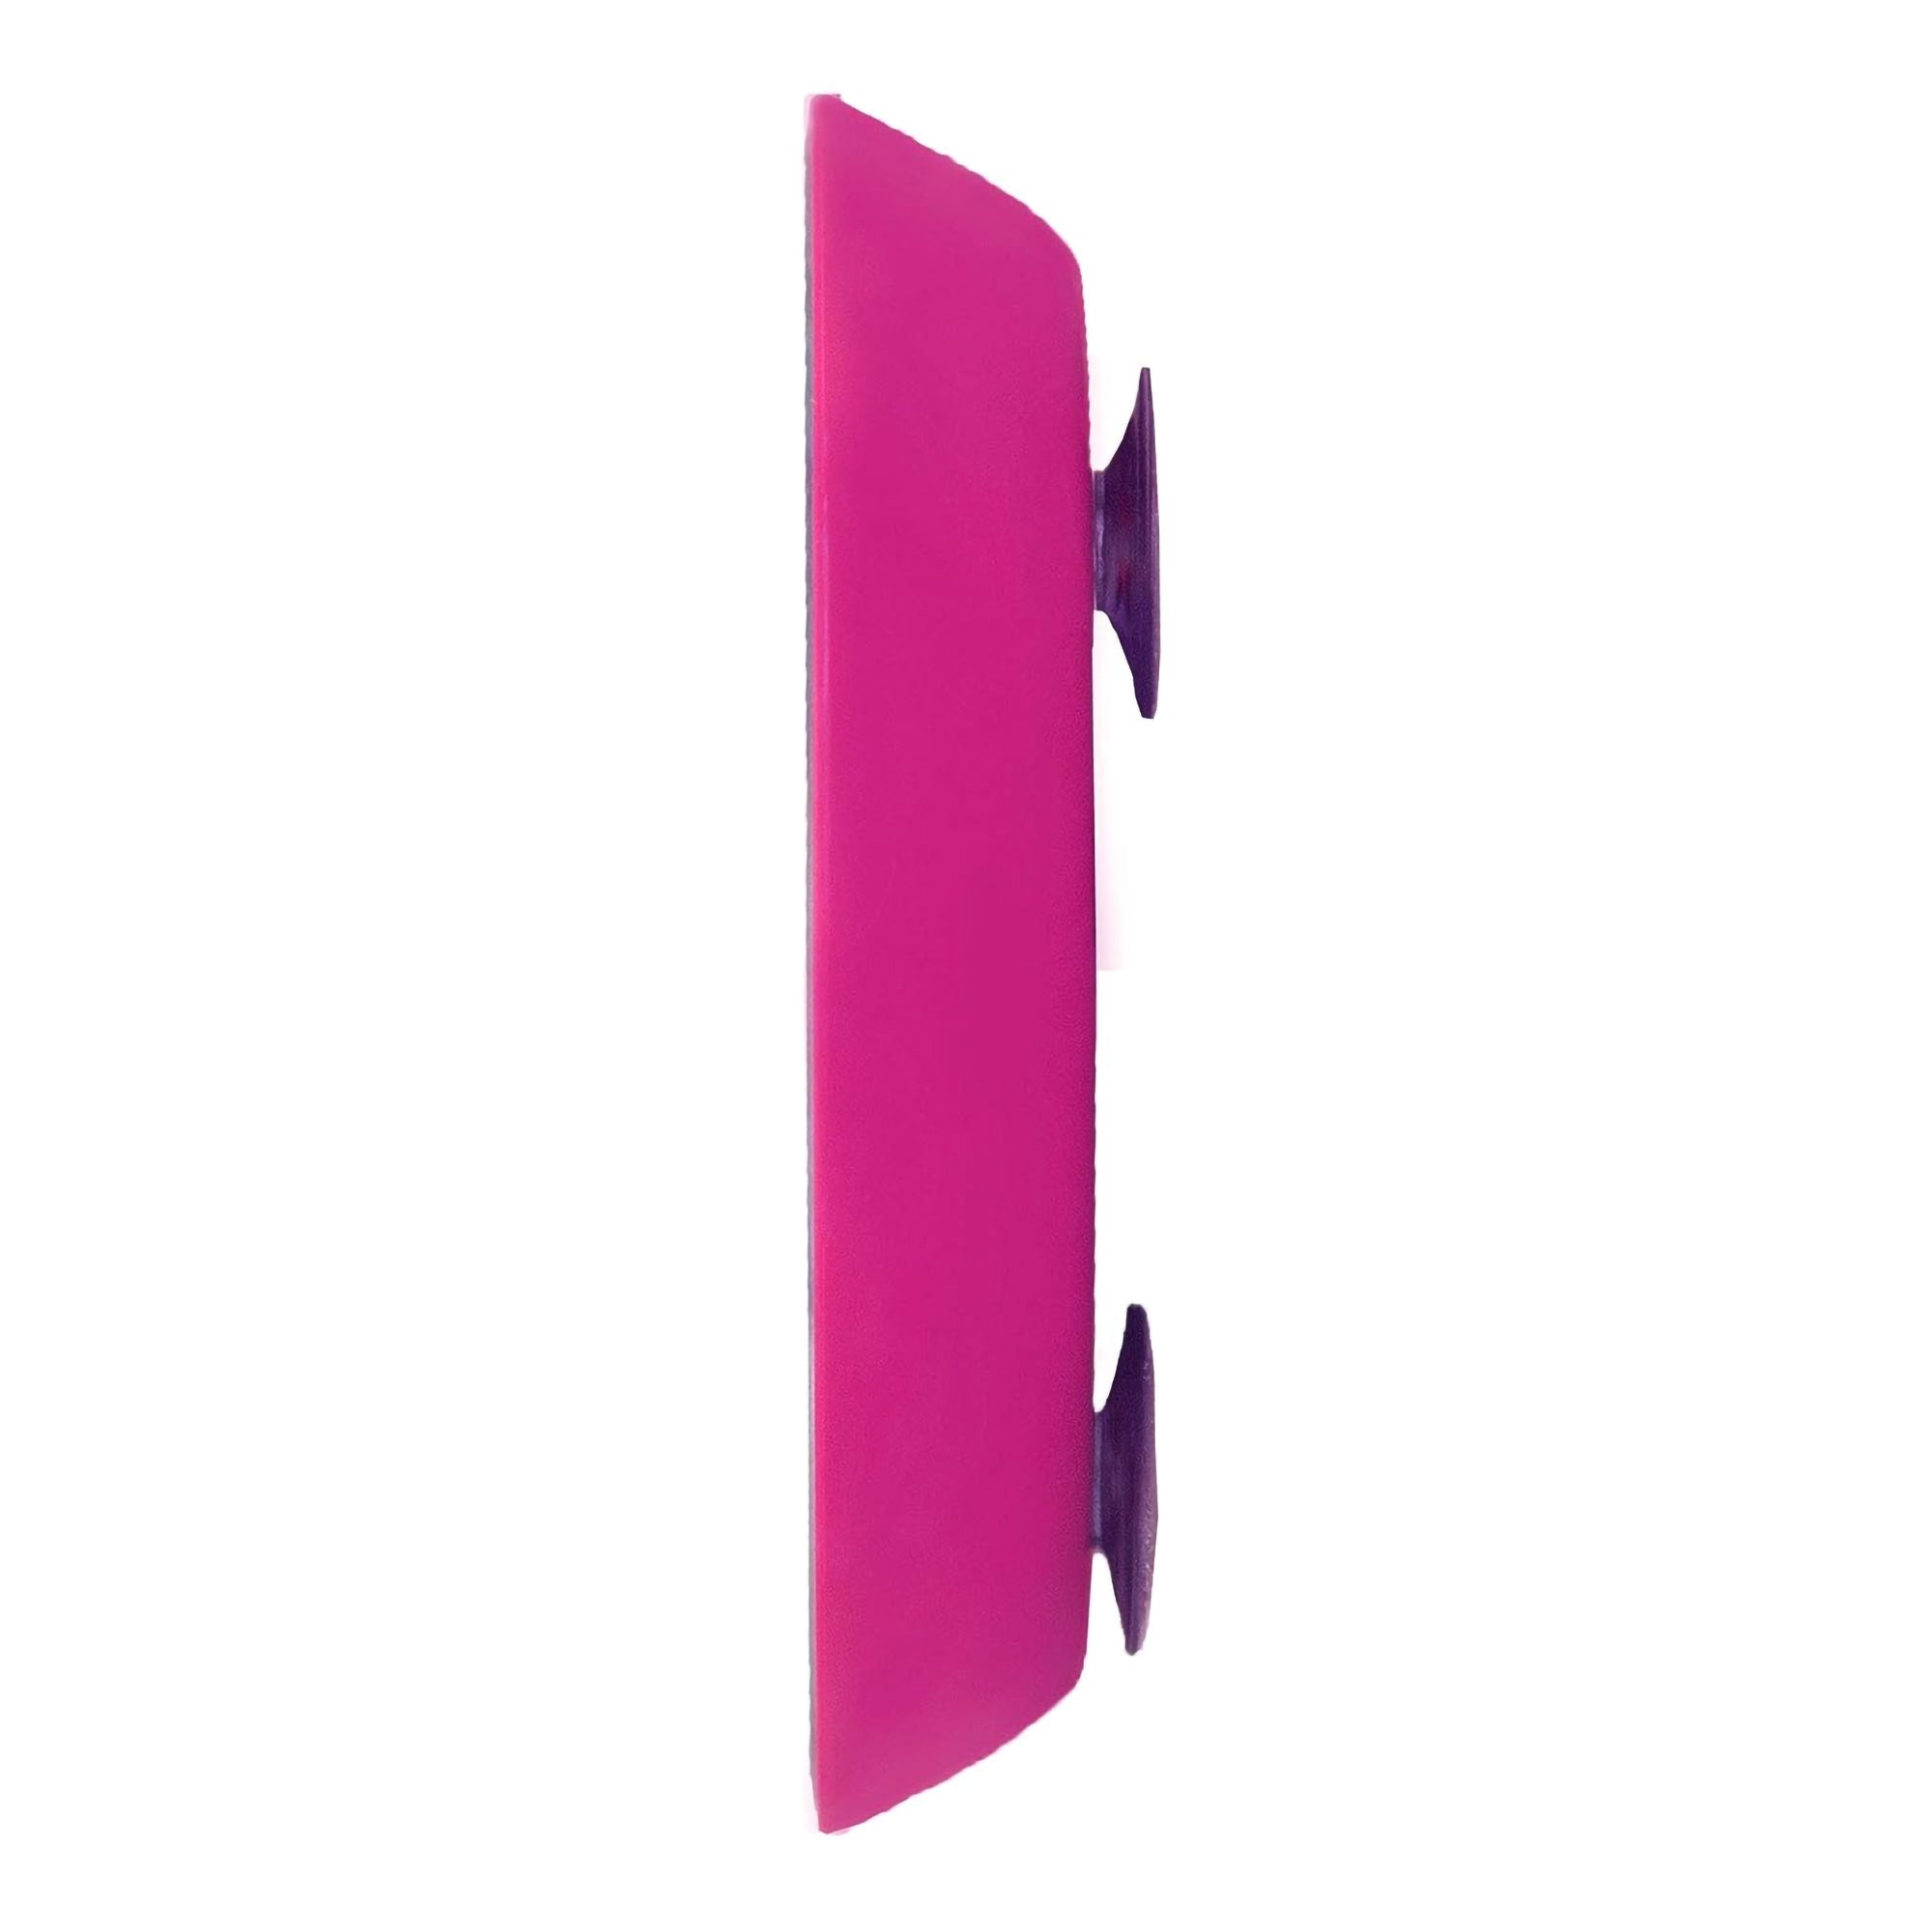 Zadro LED Lighted Spot Travel Mirror in Pink / HOT PINK